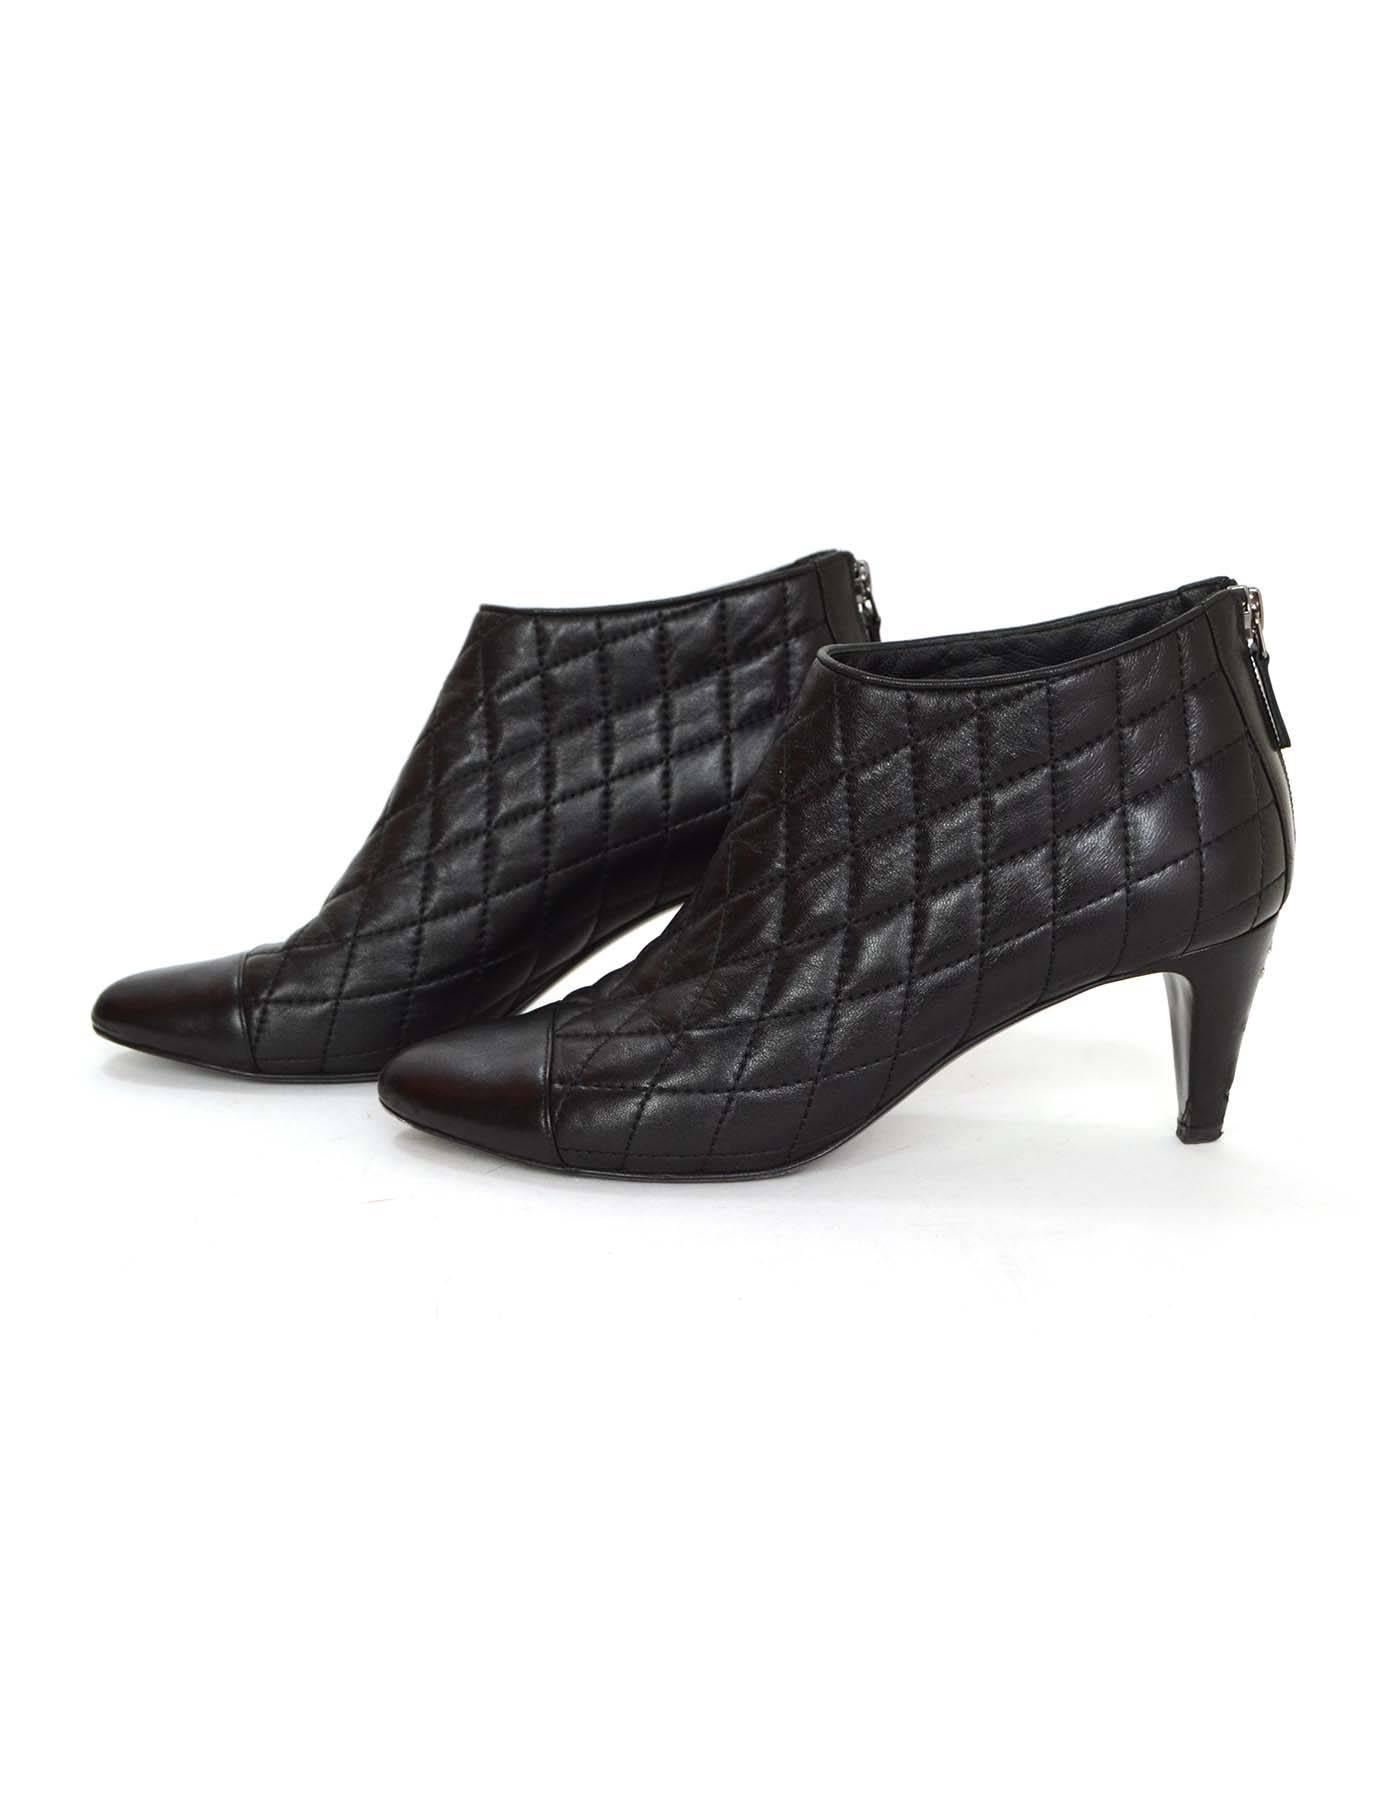 Chanel Black Leather Quilted Heel Booties sz 8.5
Features cap toe and silver CC hardware with back zipper tab closure

Made in: Italy
Color: Black
Composition: Leather 
Sole Stamp: CC Made in Italy 38 1/2
Closure/opening: 3